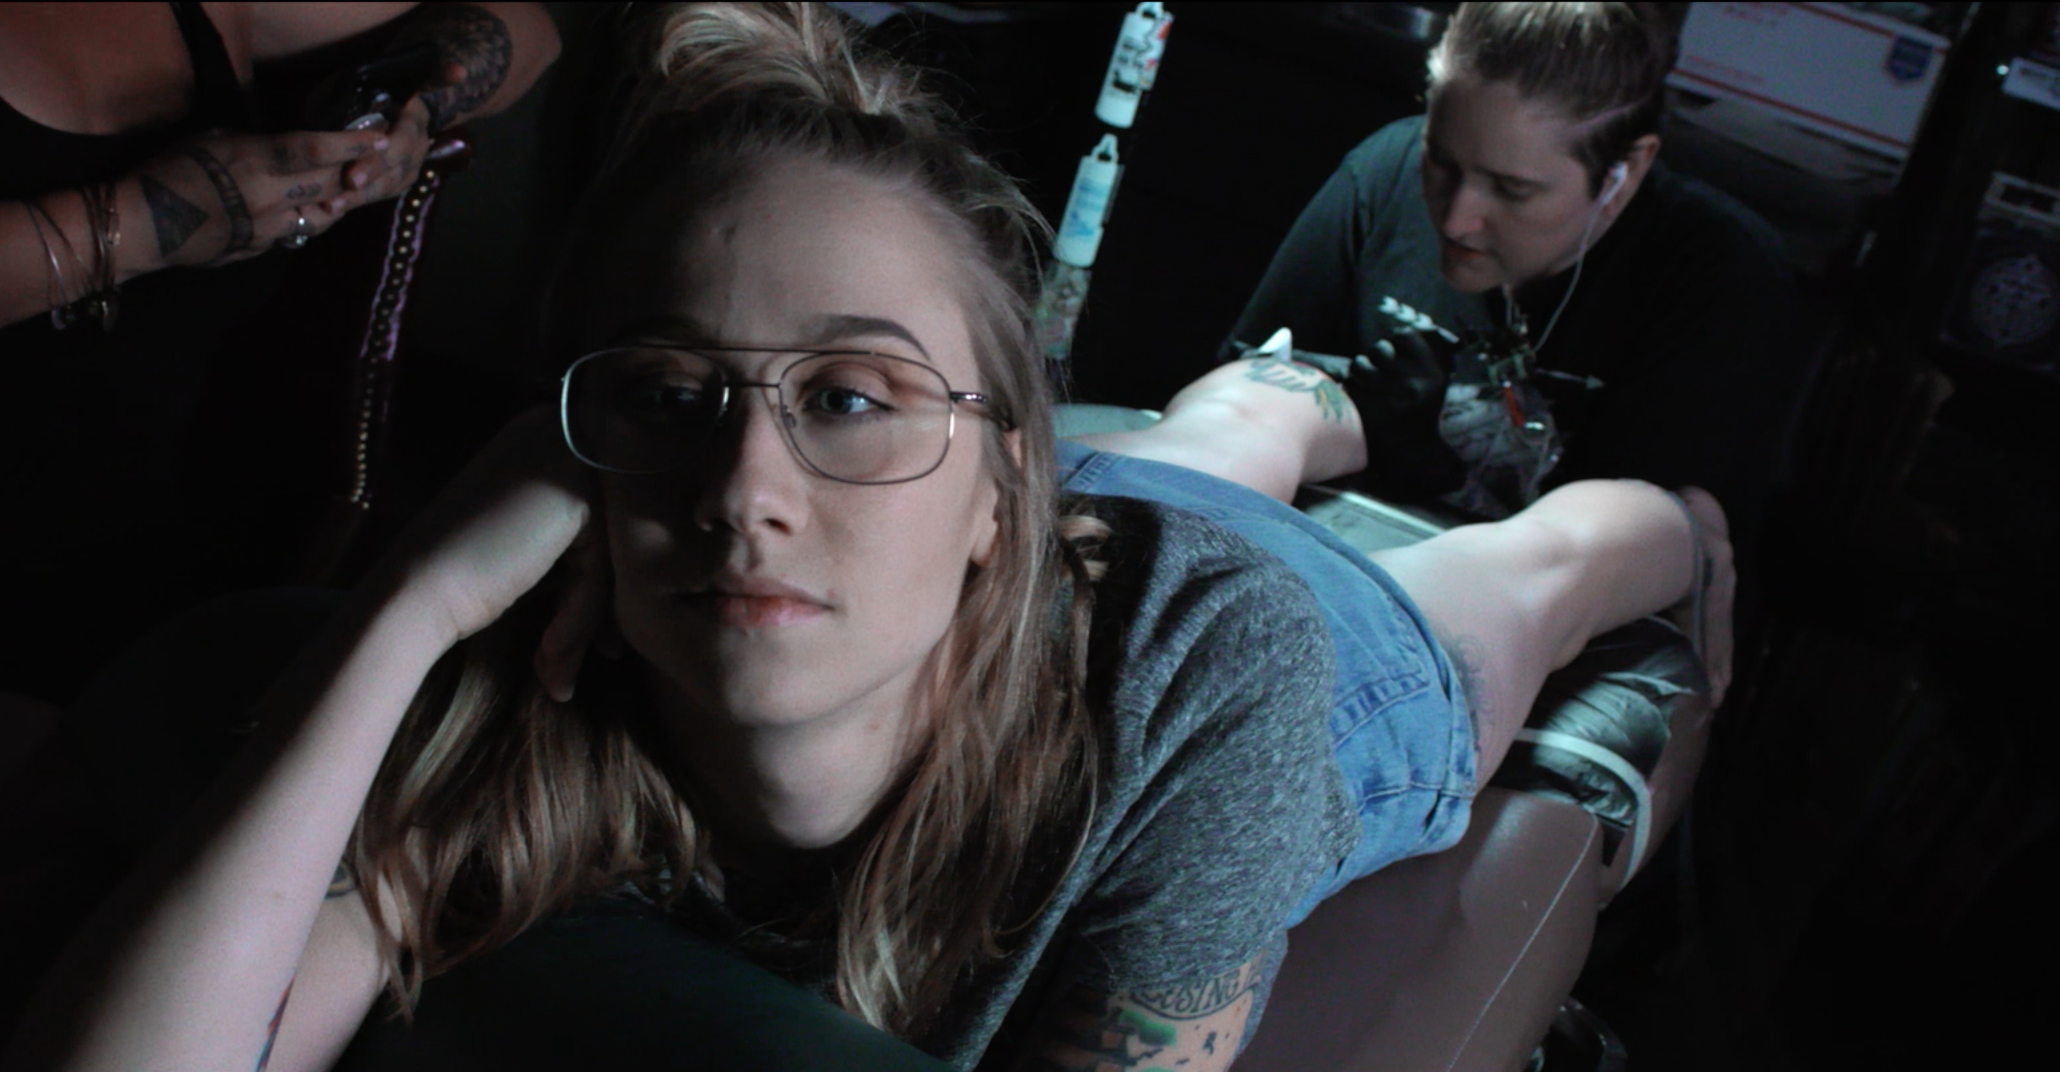 A white woman, Emily Nestor, the star of Citizen Sleuth, is seen reclining as she receives a tattoo on the back of her calf.